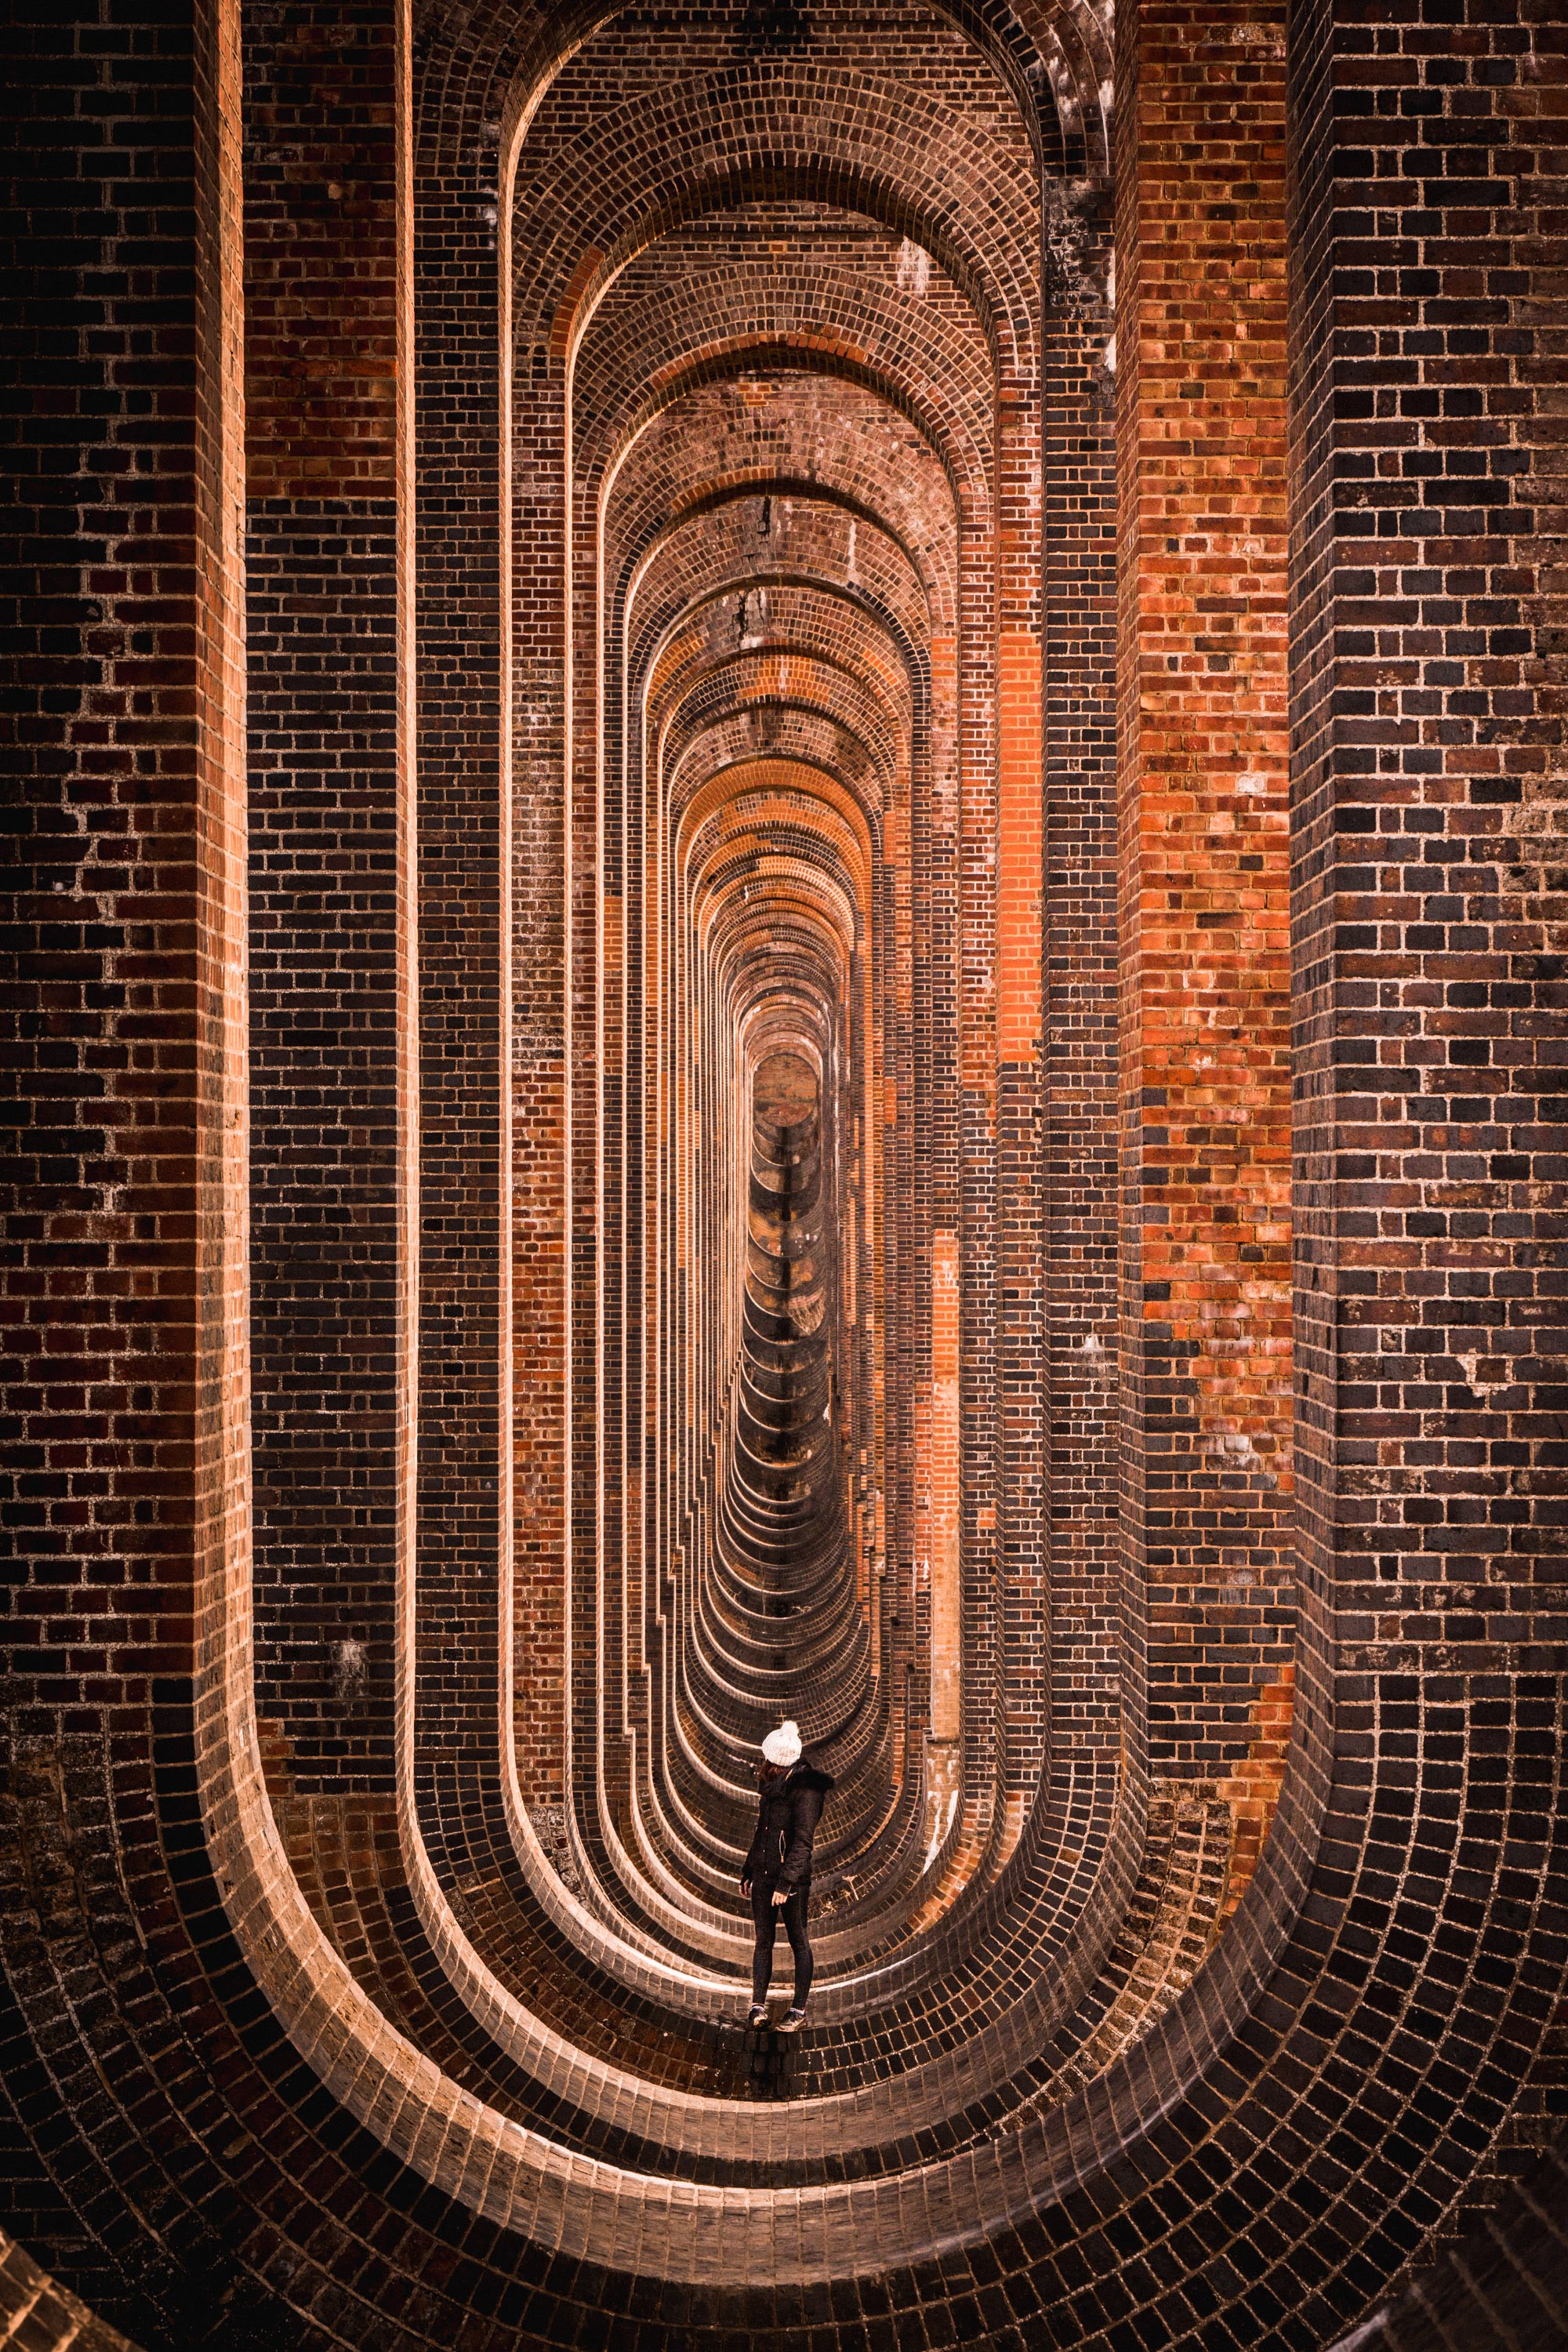 ouse valley viaduct